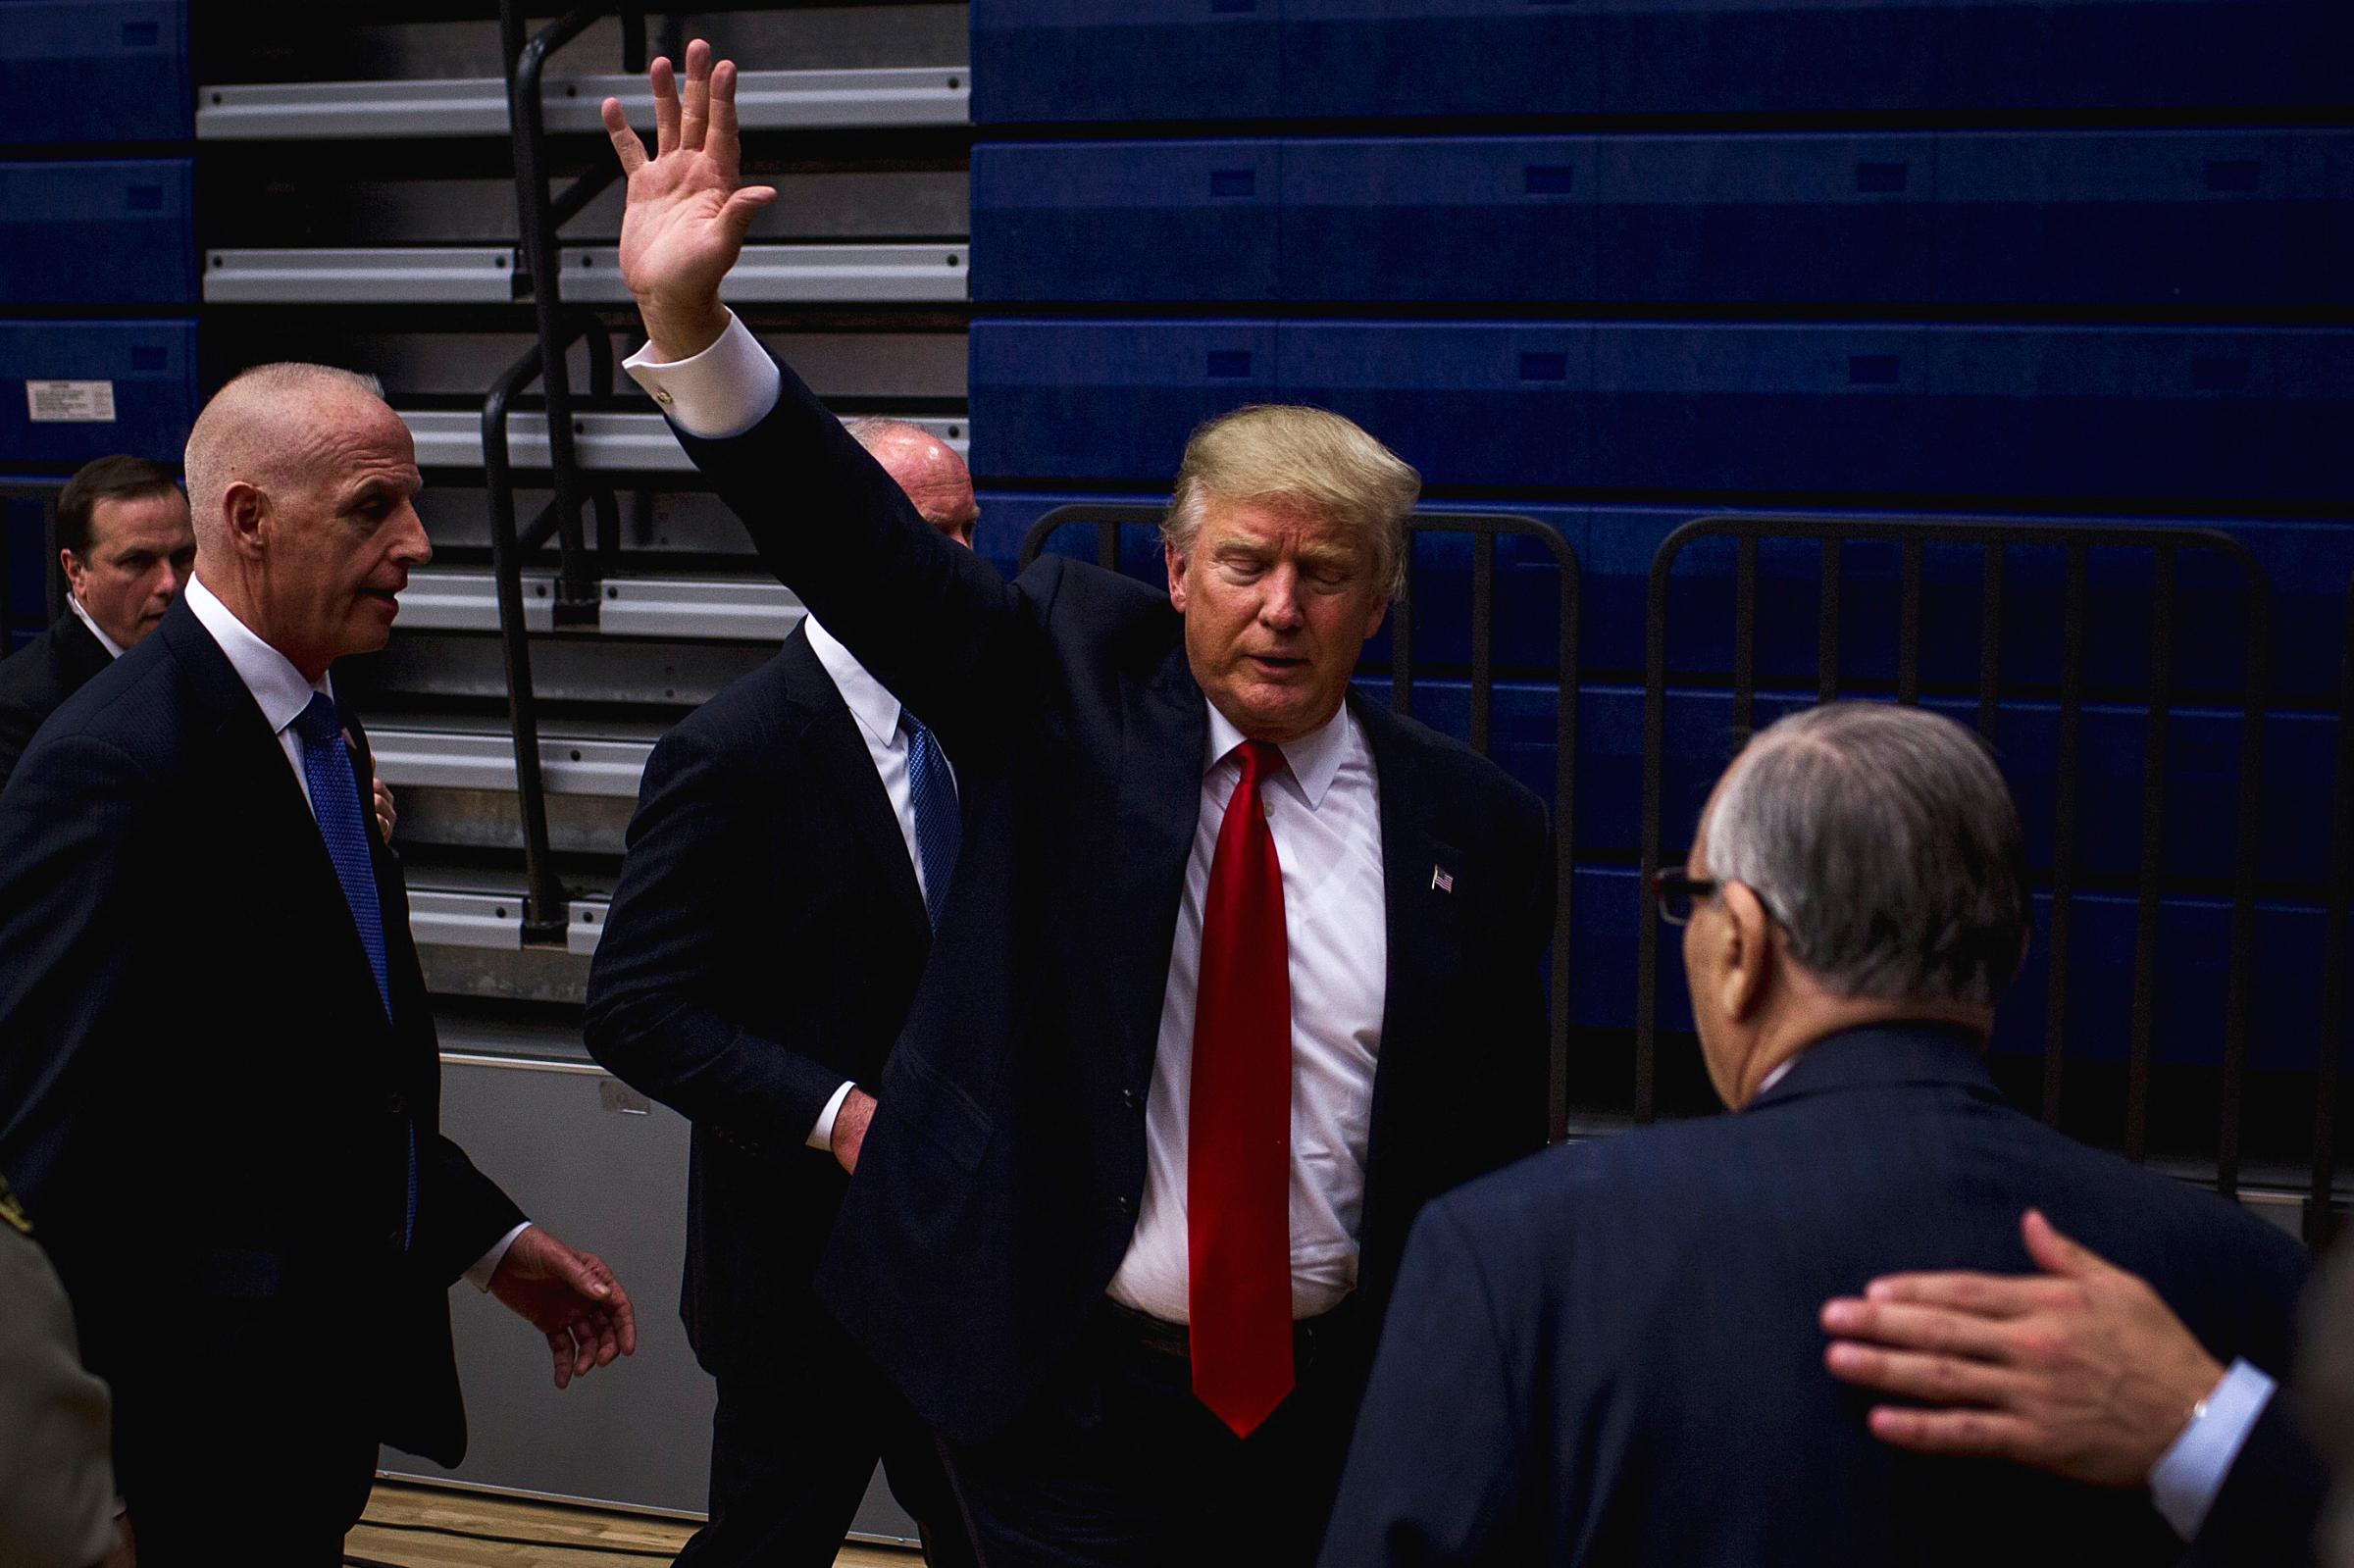 Donald Trump at his rally in Des Moines, Iowa on Jan. 26, 2016.